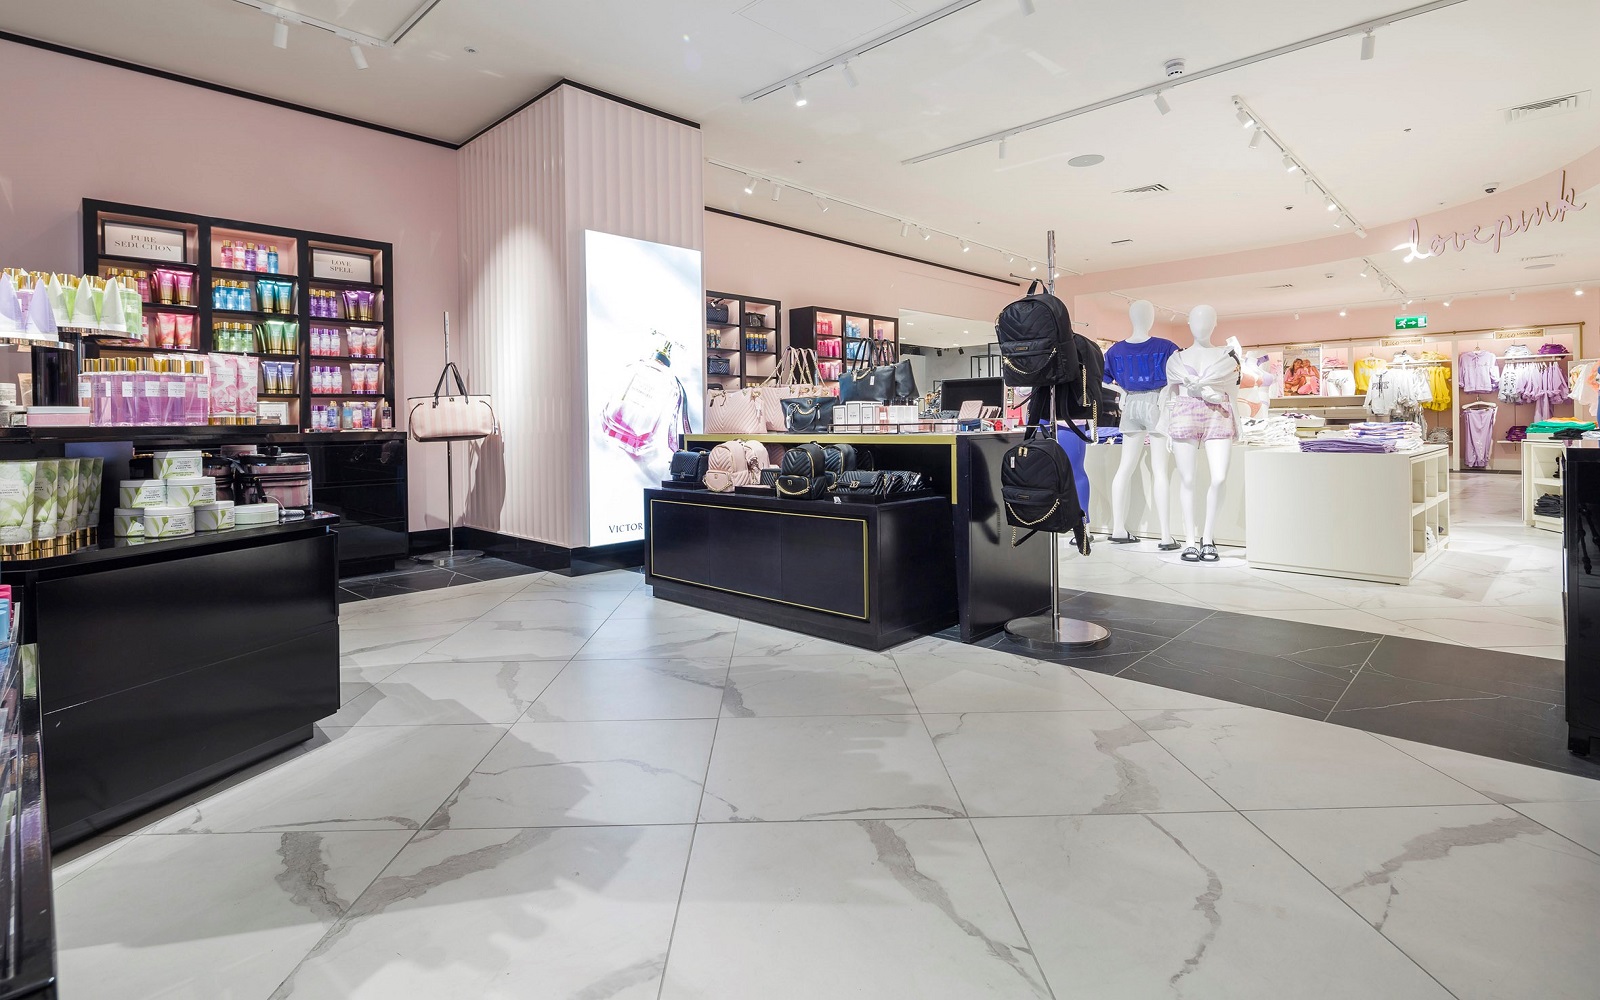 Strata Technical Tiles from Parkside in flagship store design